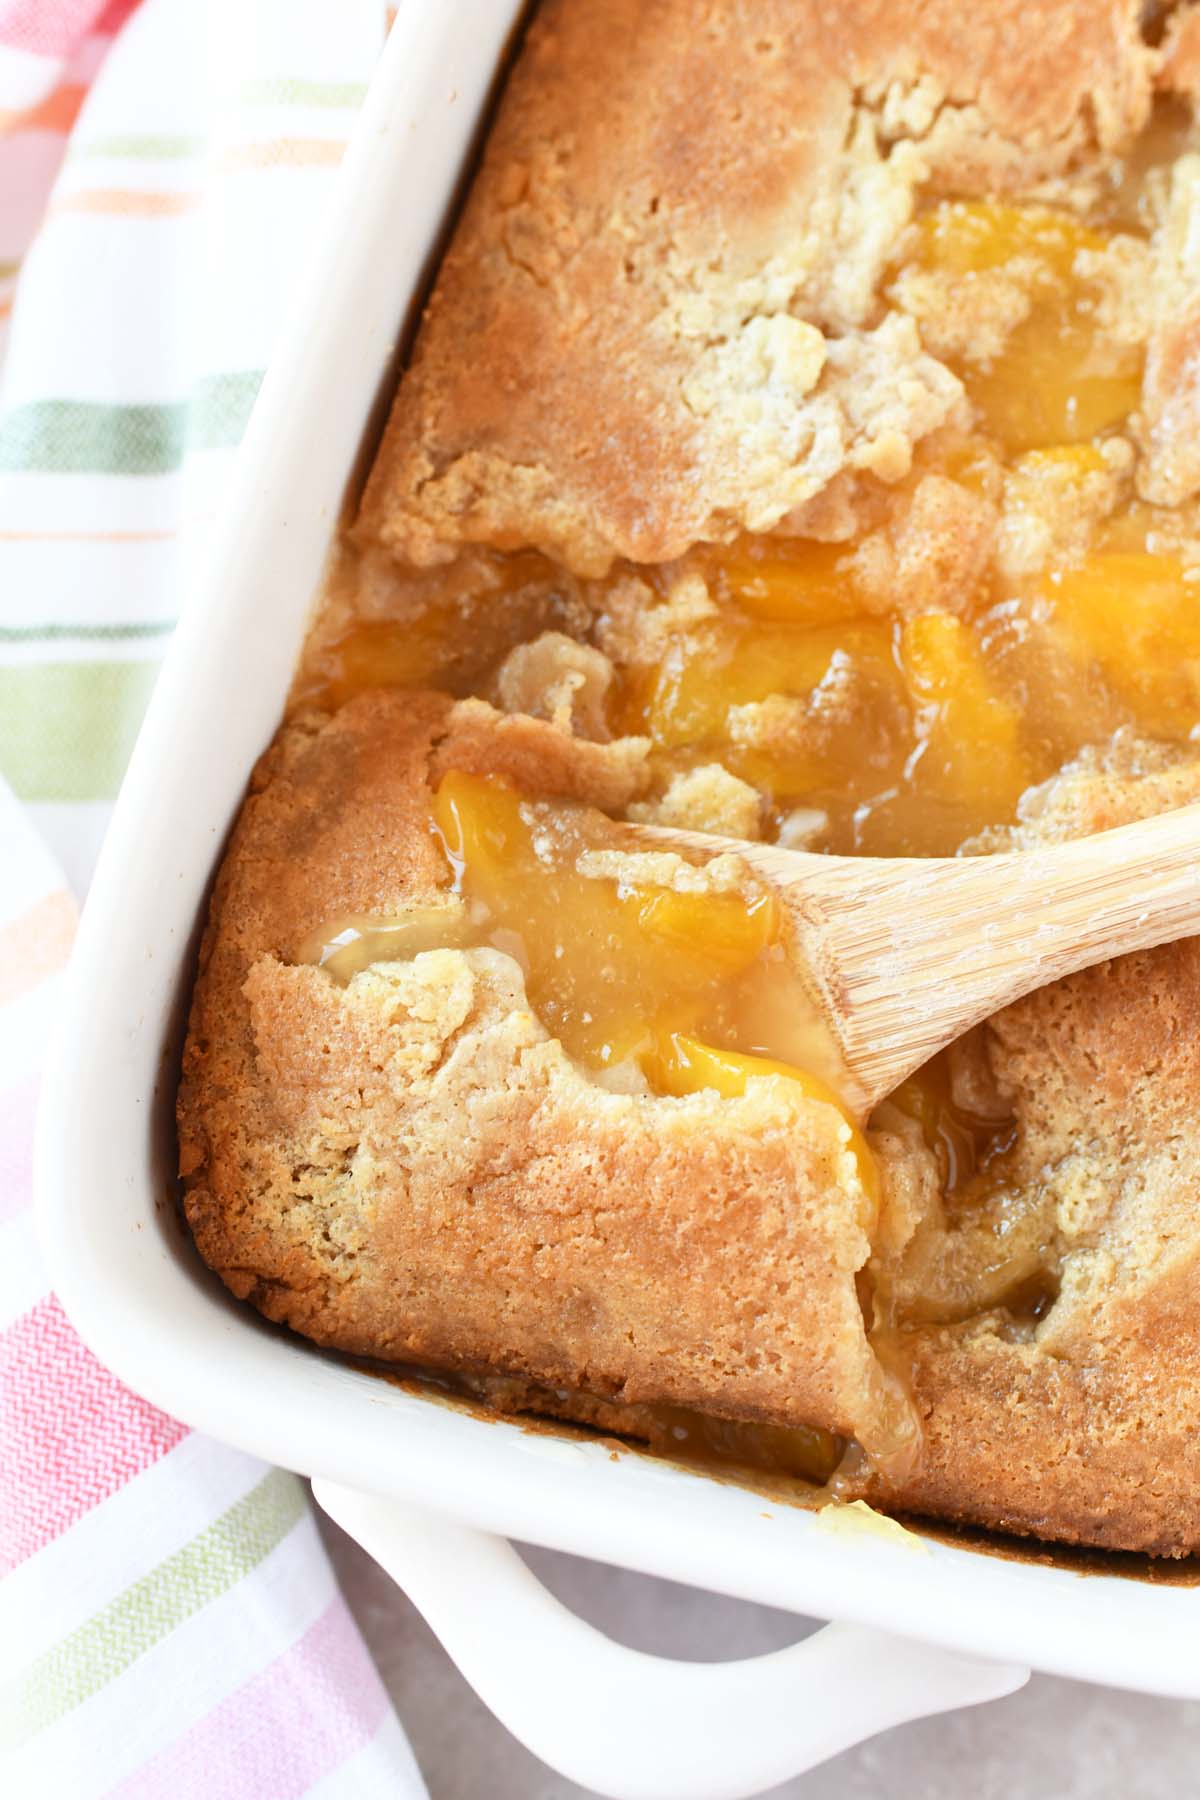 Peach cobbler with a wooden spoon.